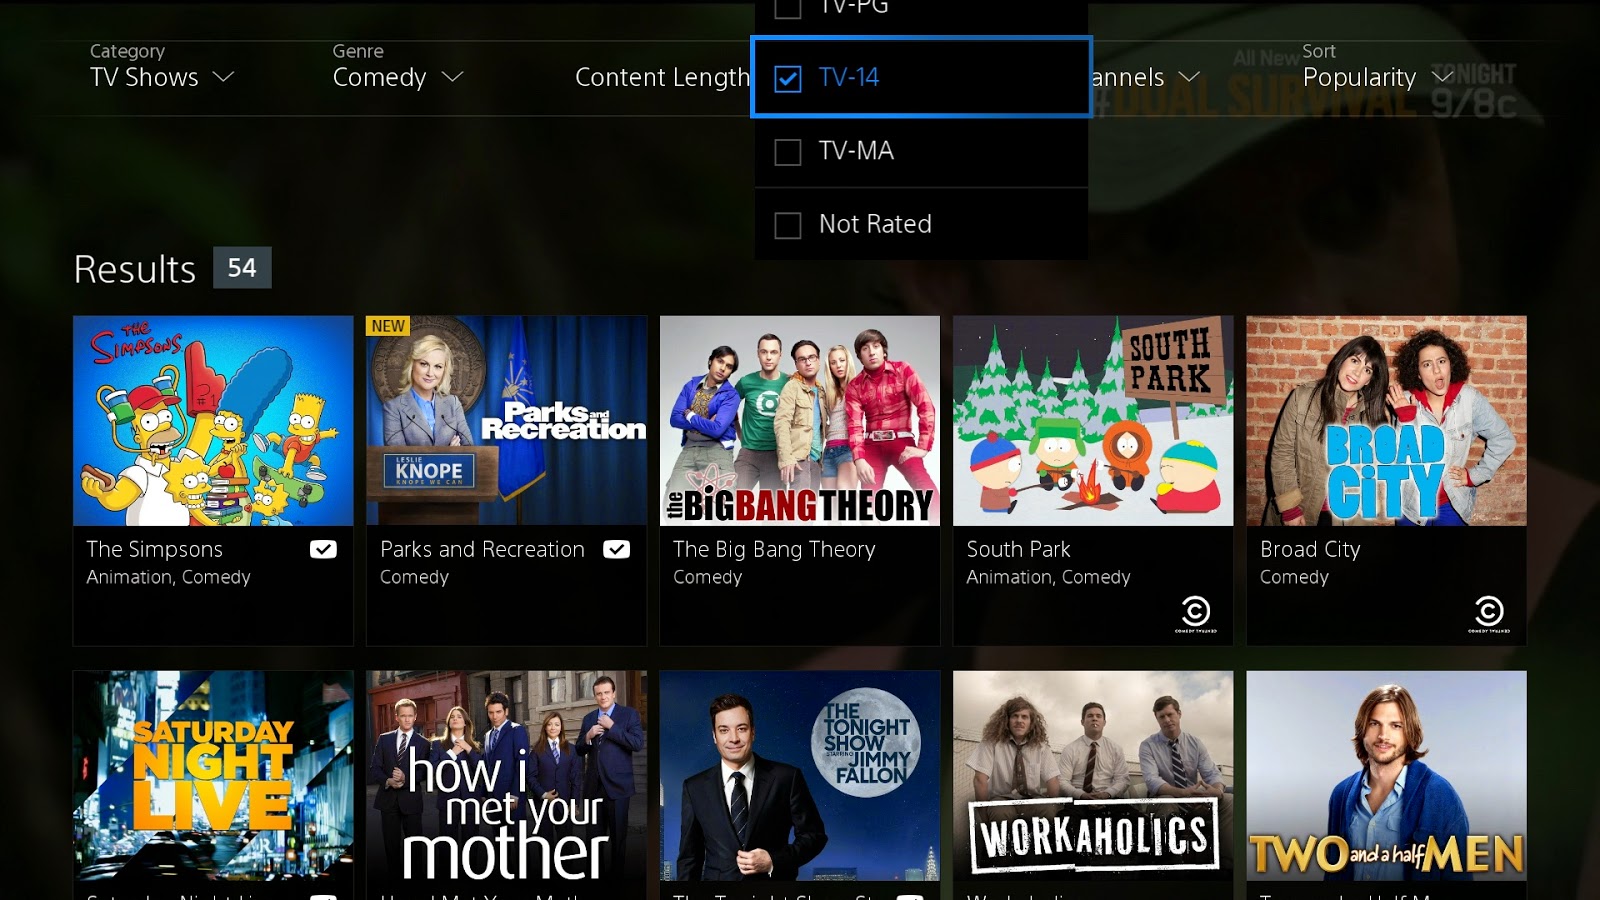 Sony Launches 'PlayStation Vue' Cloud TV Service, Coming to iPad Soon